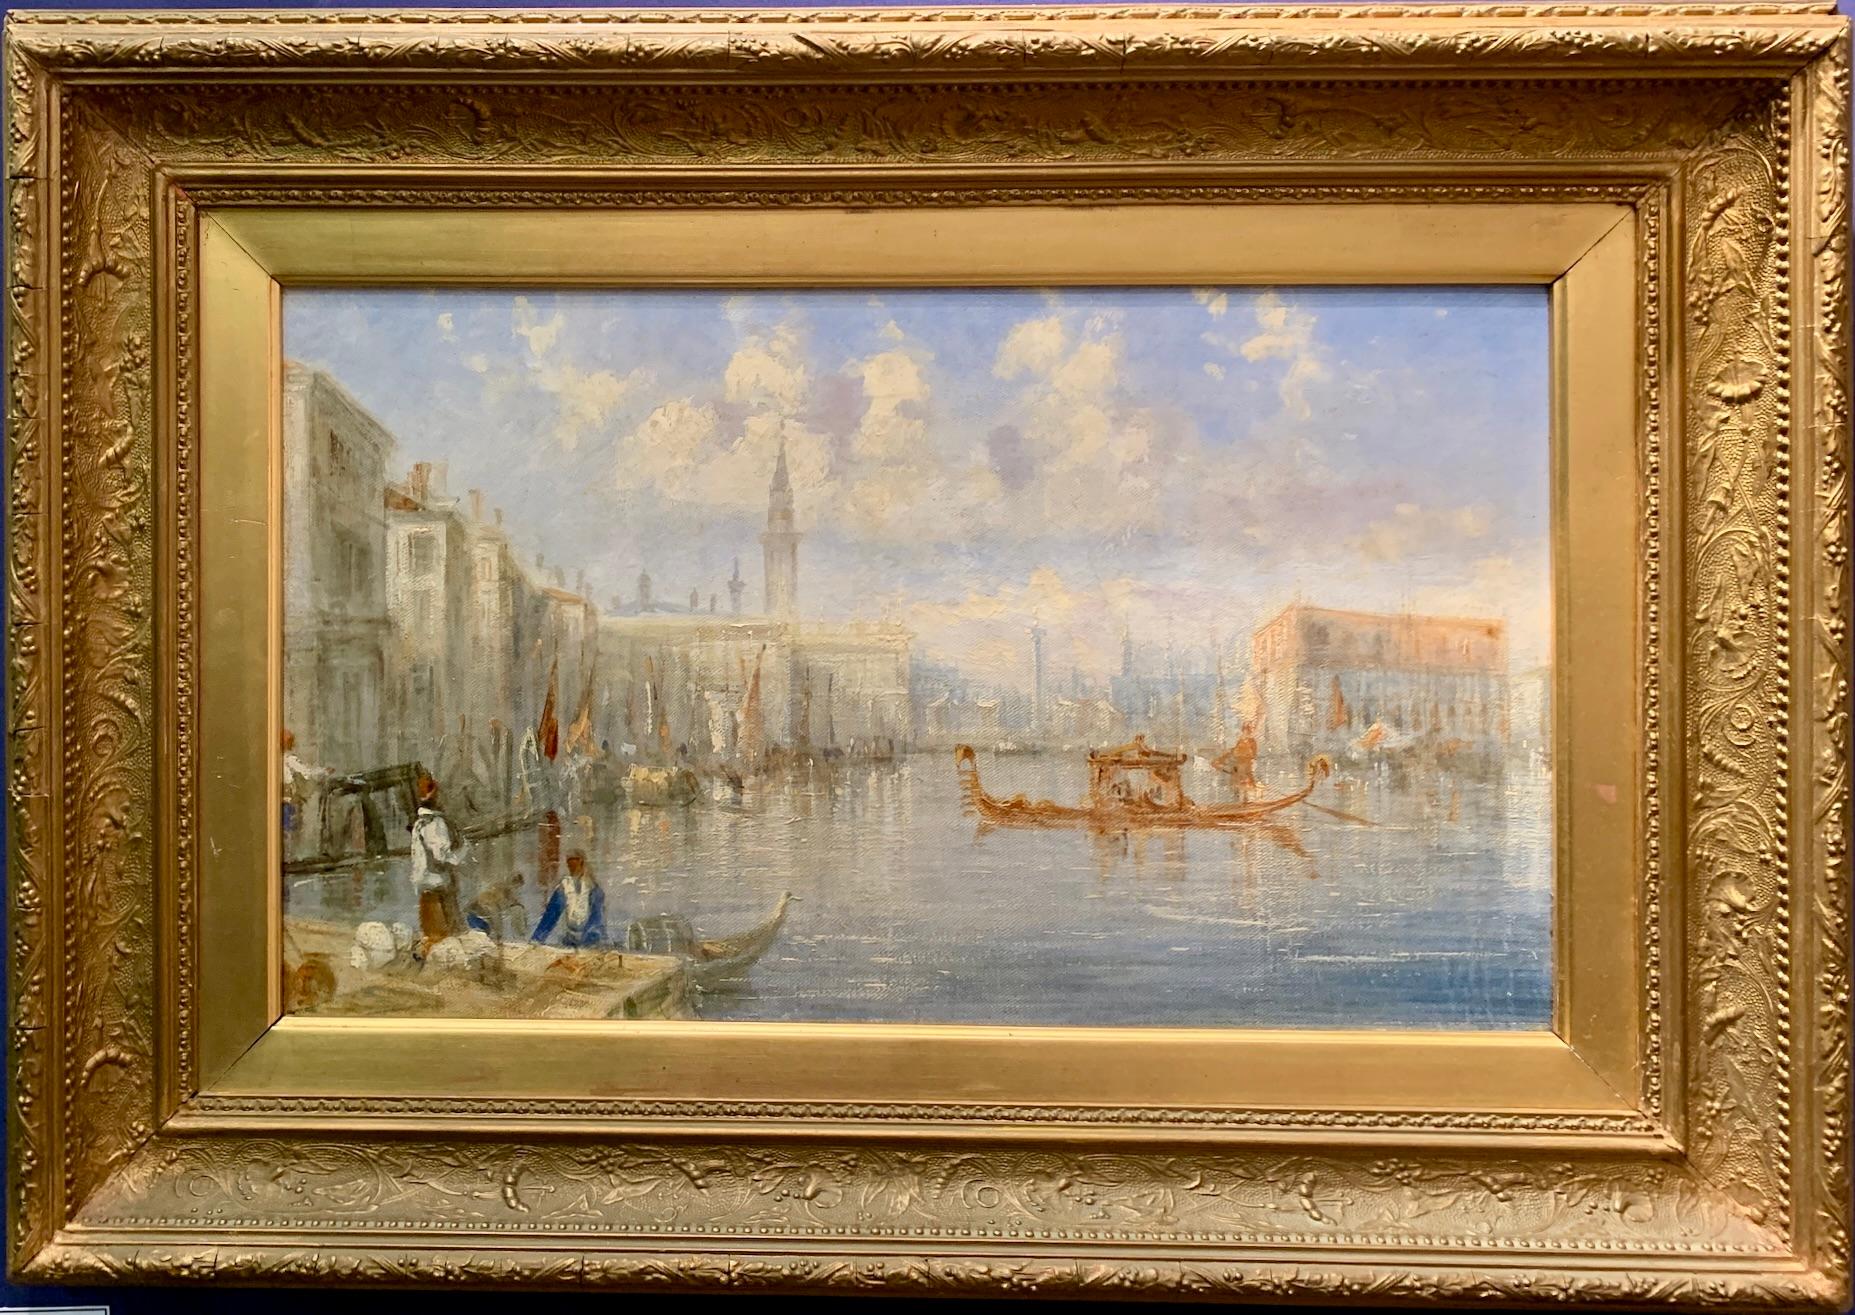 Landscape Painting Francis Moltino - View of Venice with St. Marks and the Grand Canal (Vue de Venise avec le Grand Canal) - Angleterre du 19ème siècle